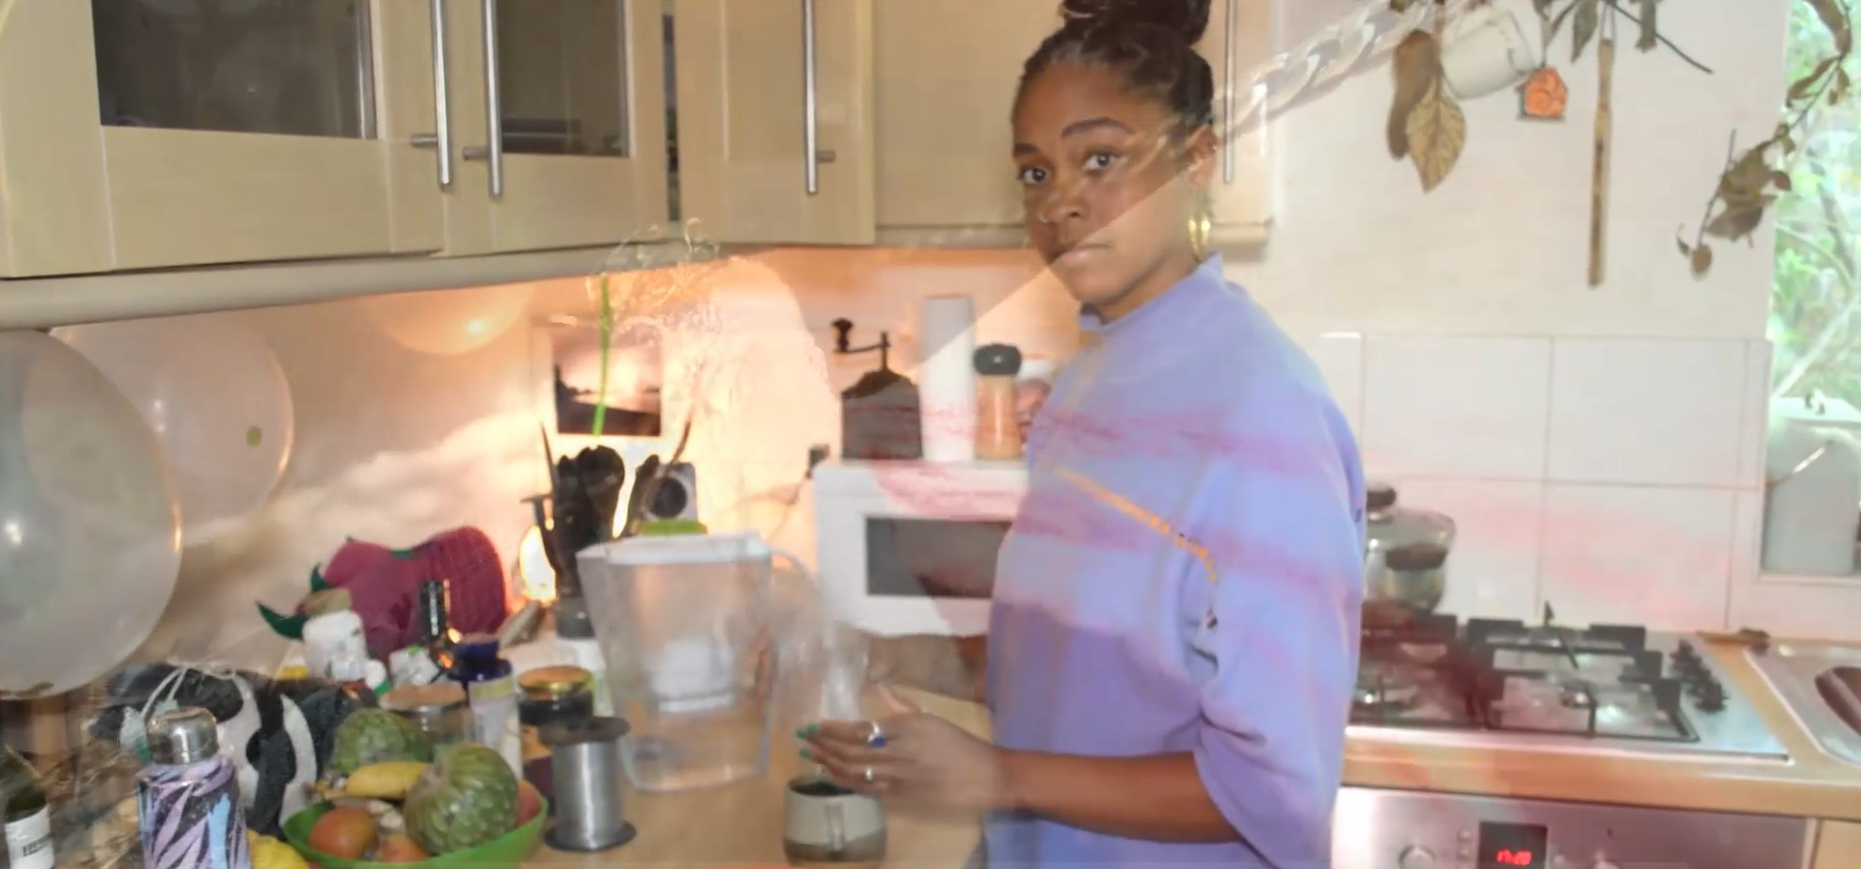 A young light-skinned Black person in a kitchen by the counter. They wear a violet oversized shirt and gold earrings. They look directly at the camera.